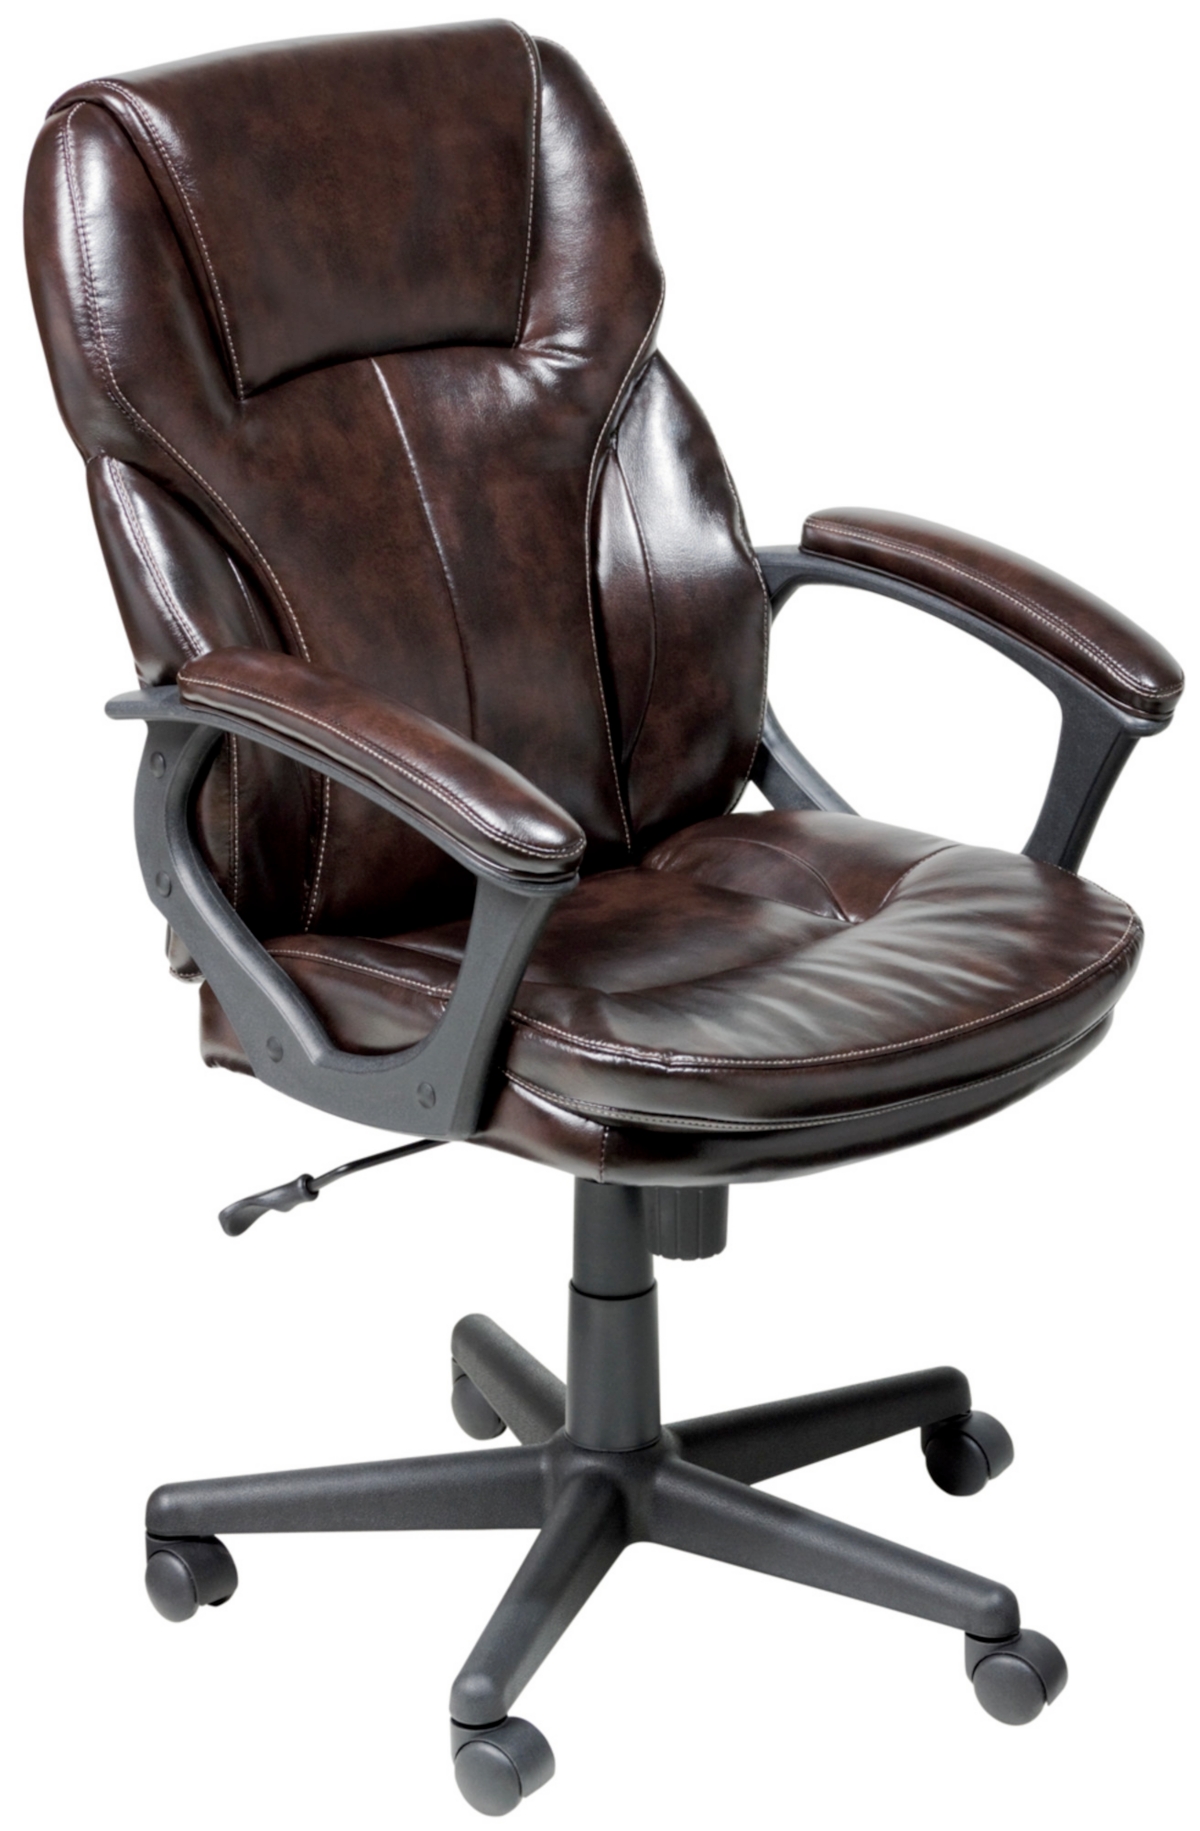 Serta Manager's Office Chair In Brown